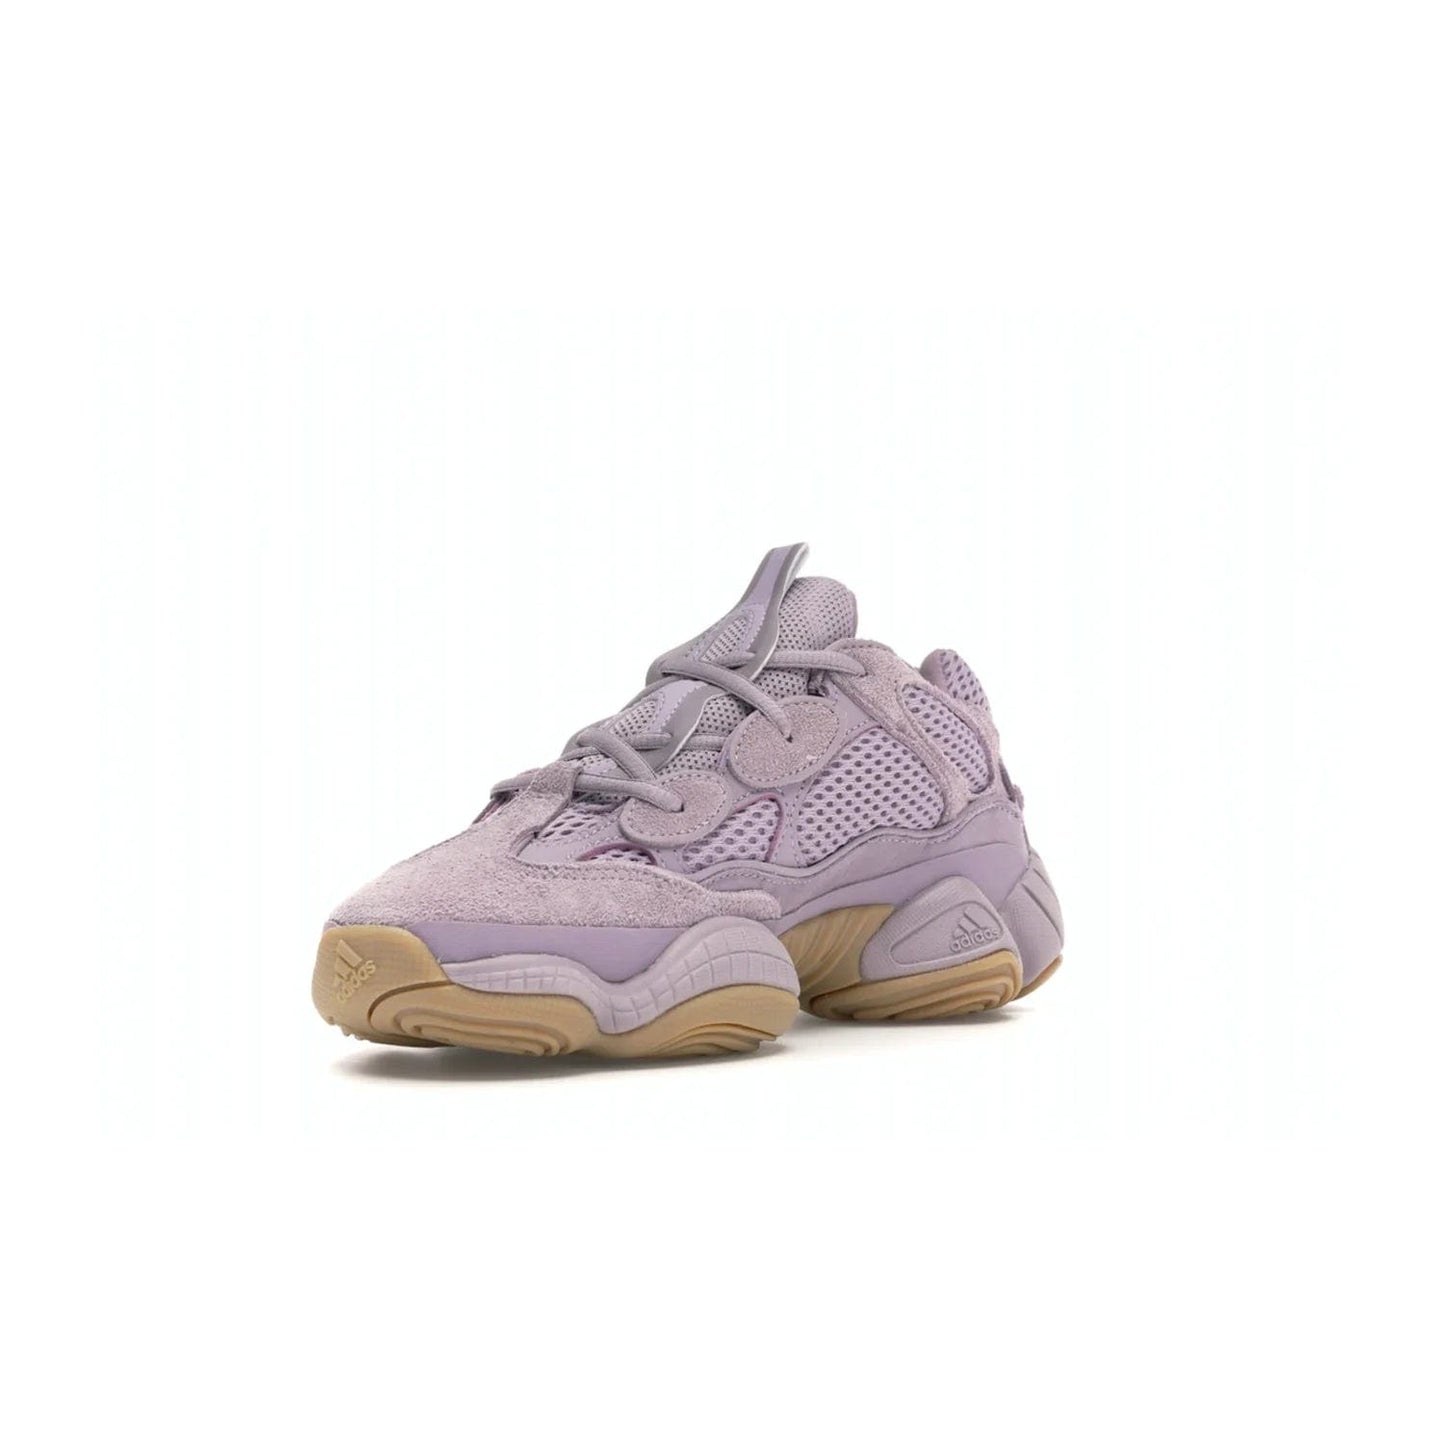 adidas Yeezy 500 Soft Vision - Image 14 - Only at www.BallersClubKickz.com - New adidas Yeezy 500 Soft Vision sneaker featuring a combination of mesh, leather, and suede in a classic Soft Vision colorway. Gum rubber outsole ensures durability and traction. An everyday sneaker that stands out from the crowd.